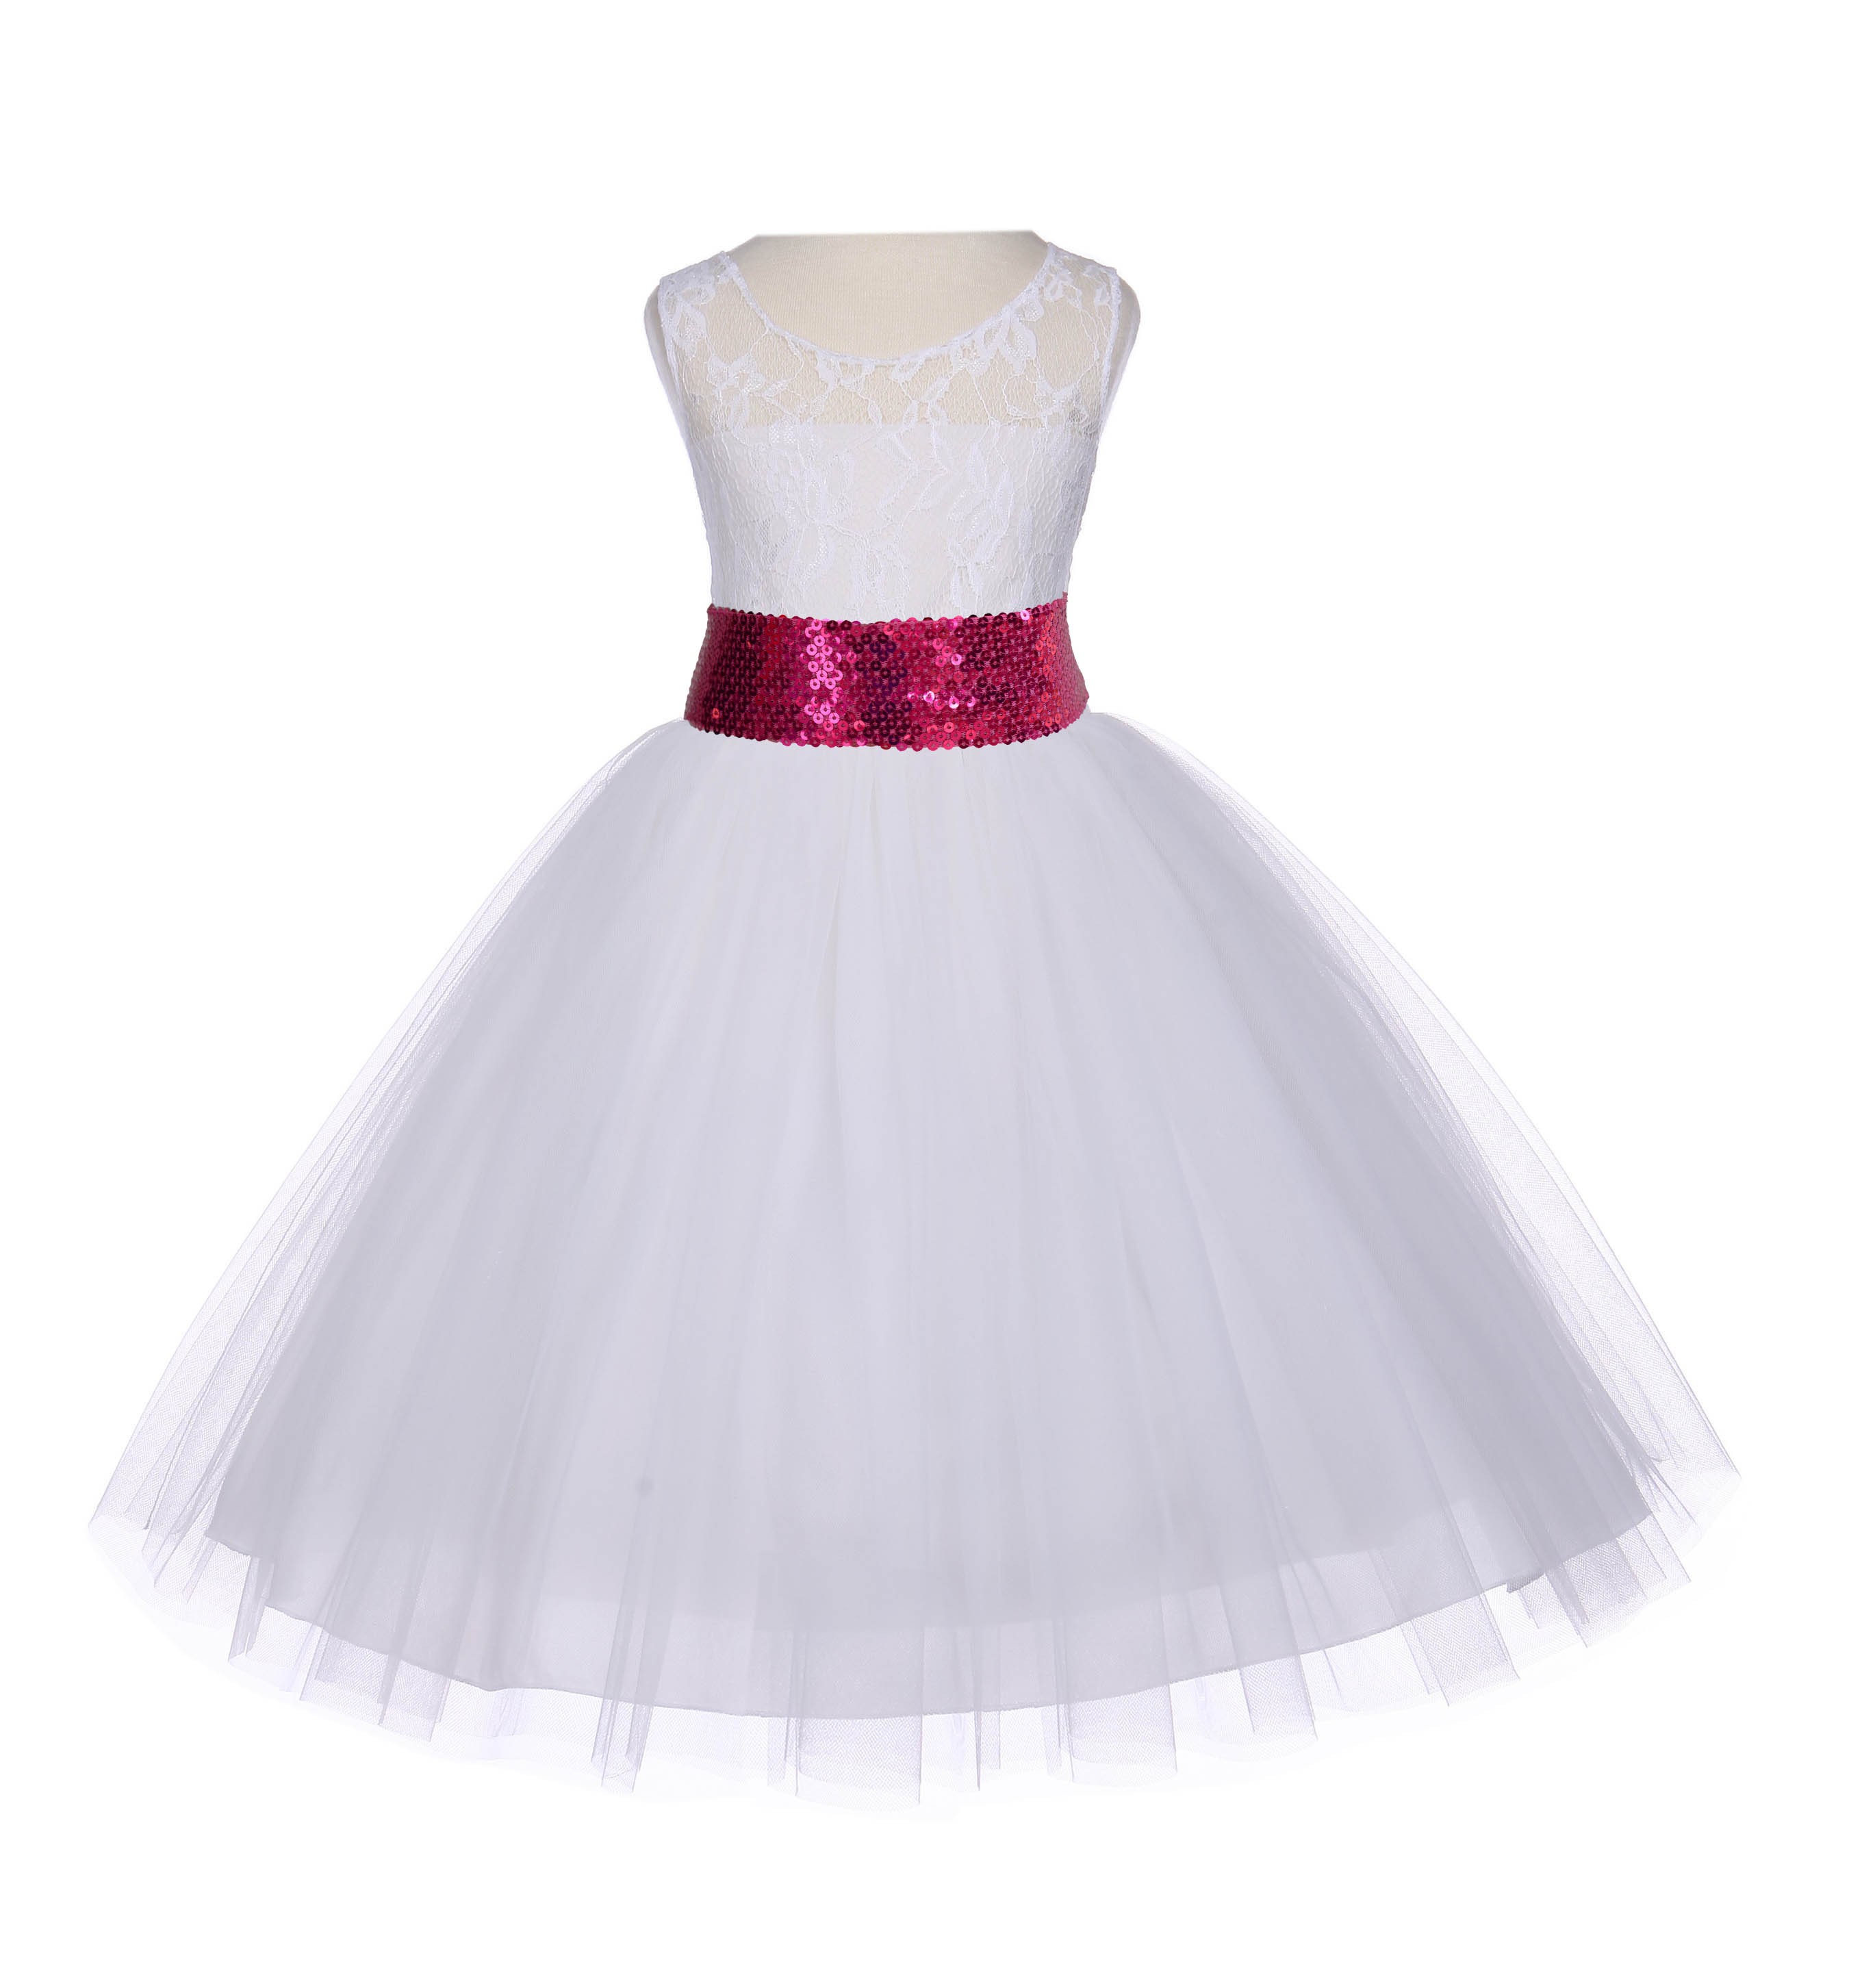 Ivory Floral Lace Bodice Tulle Fuchsia Sequin Flower Girl Dress 153mh